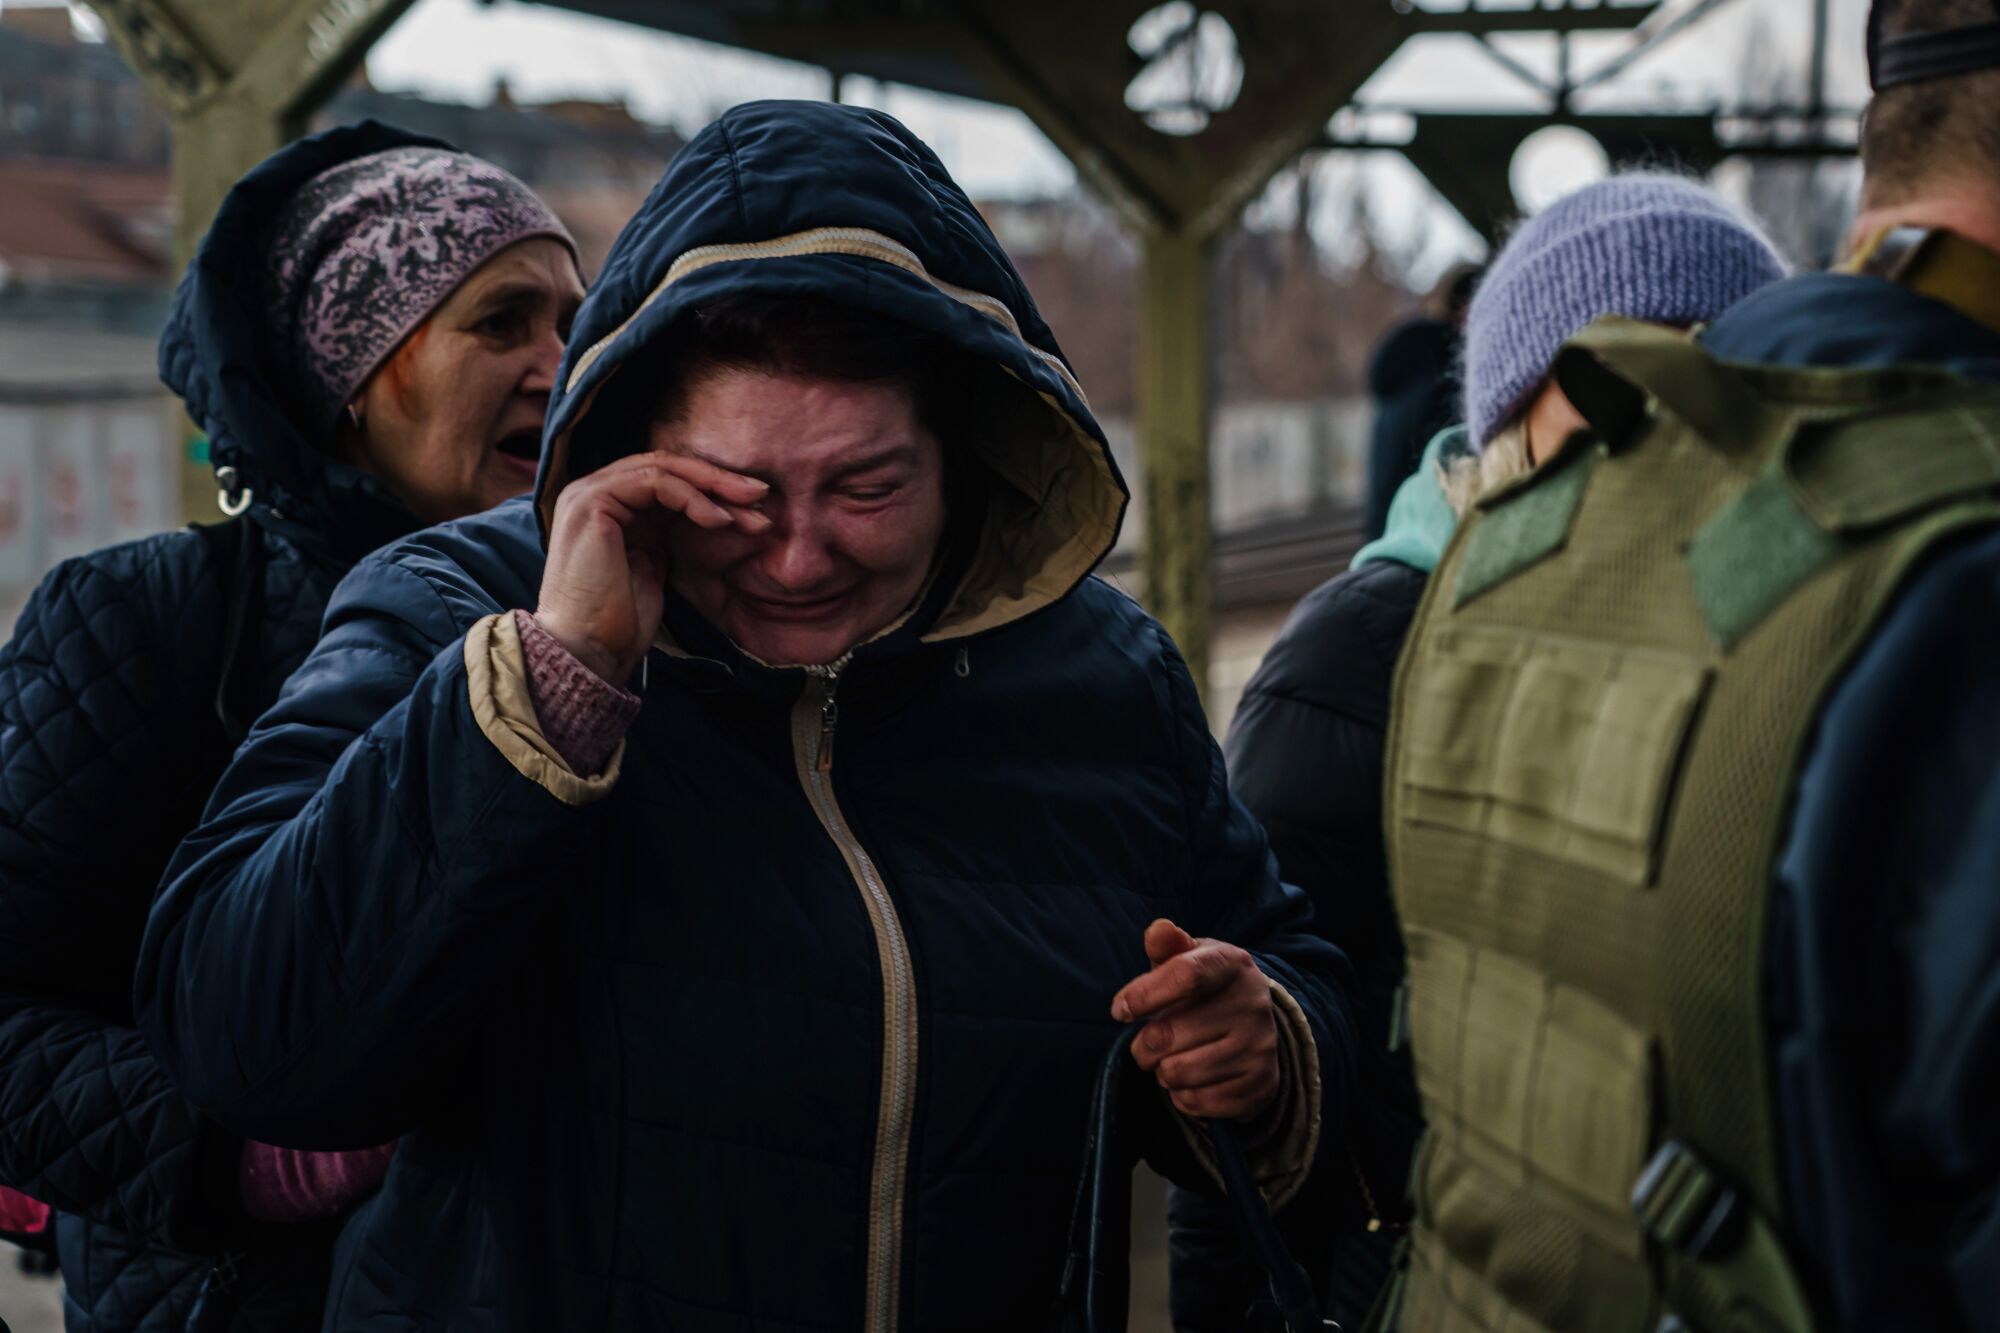 A woman breaks down in tears as she realizes she is getting to board an evacuating train in Irpin, Ukraine.